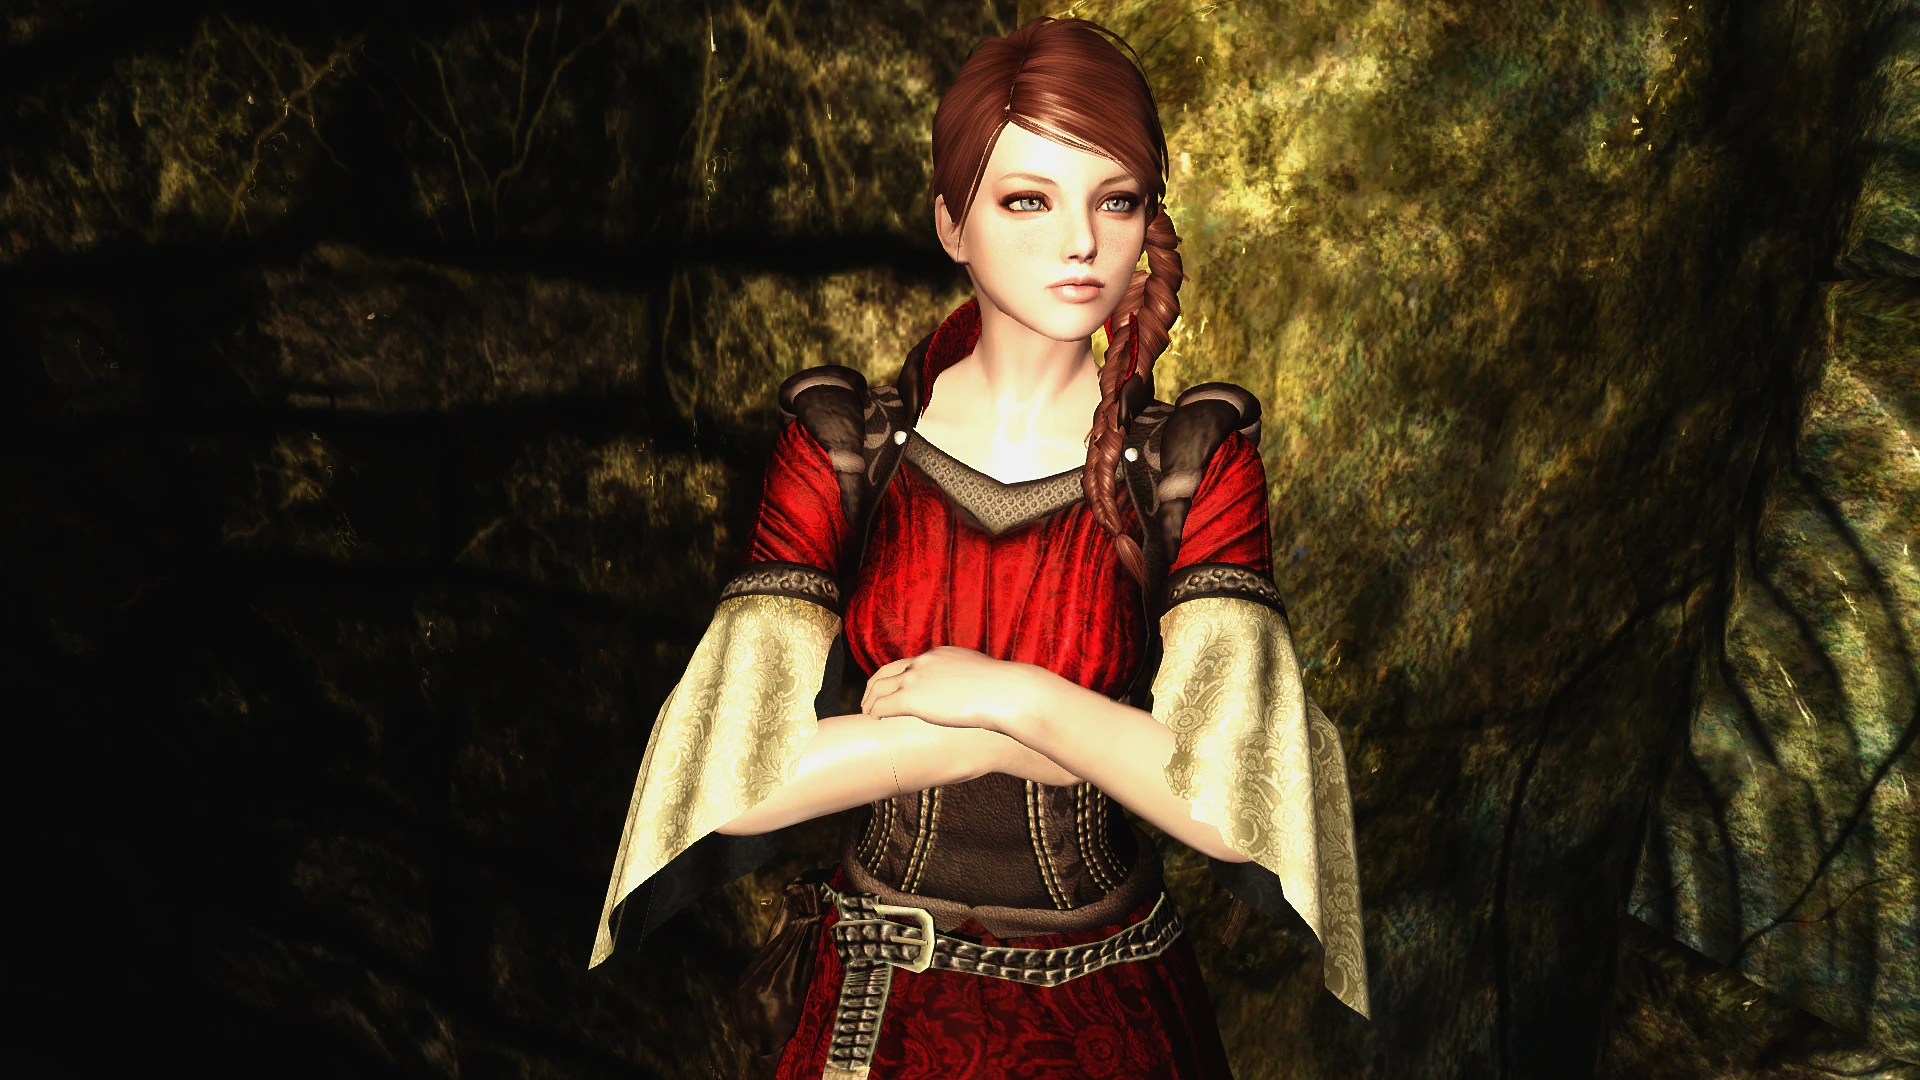 Ysolda Replacer Or Kaitlyn Follower At Skyrim Nexus Mods And Community